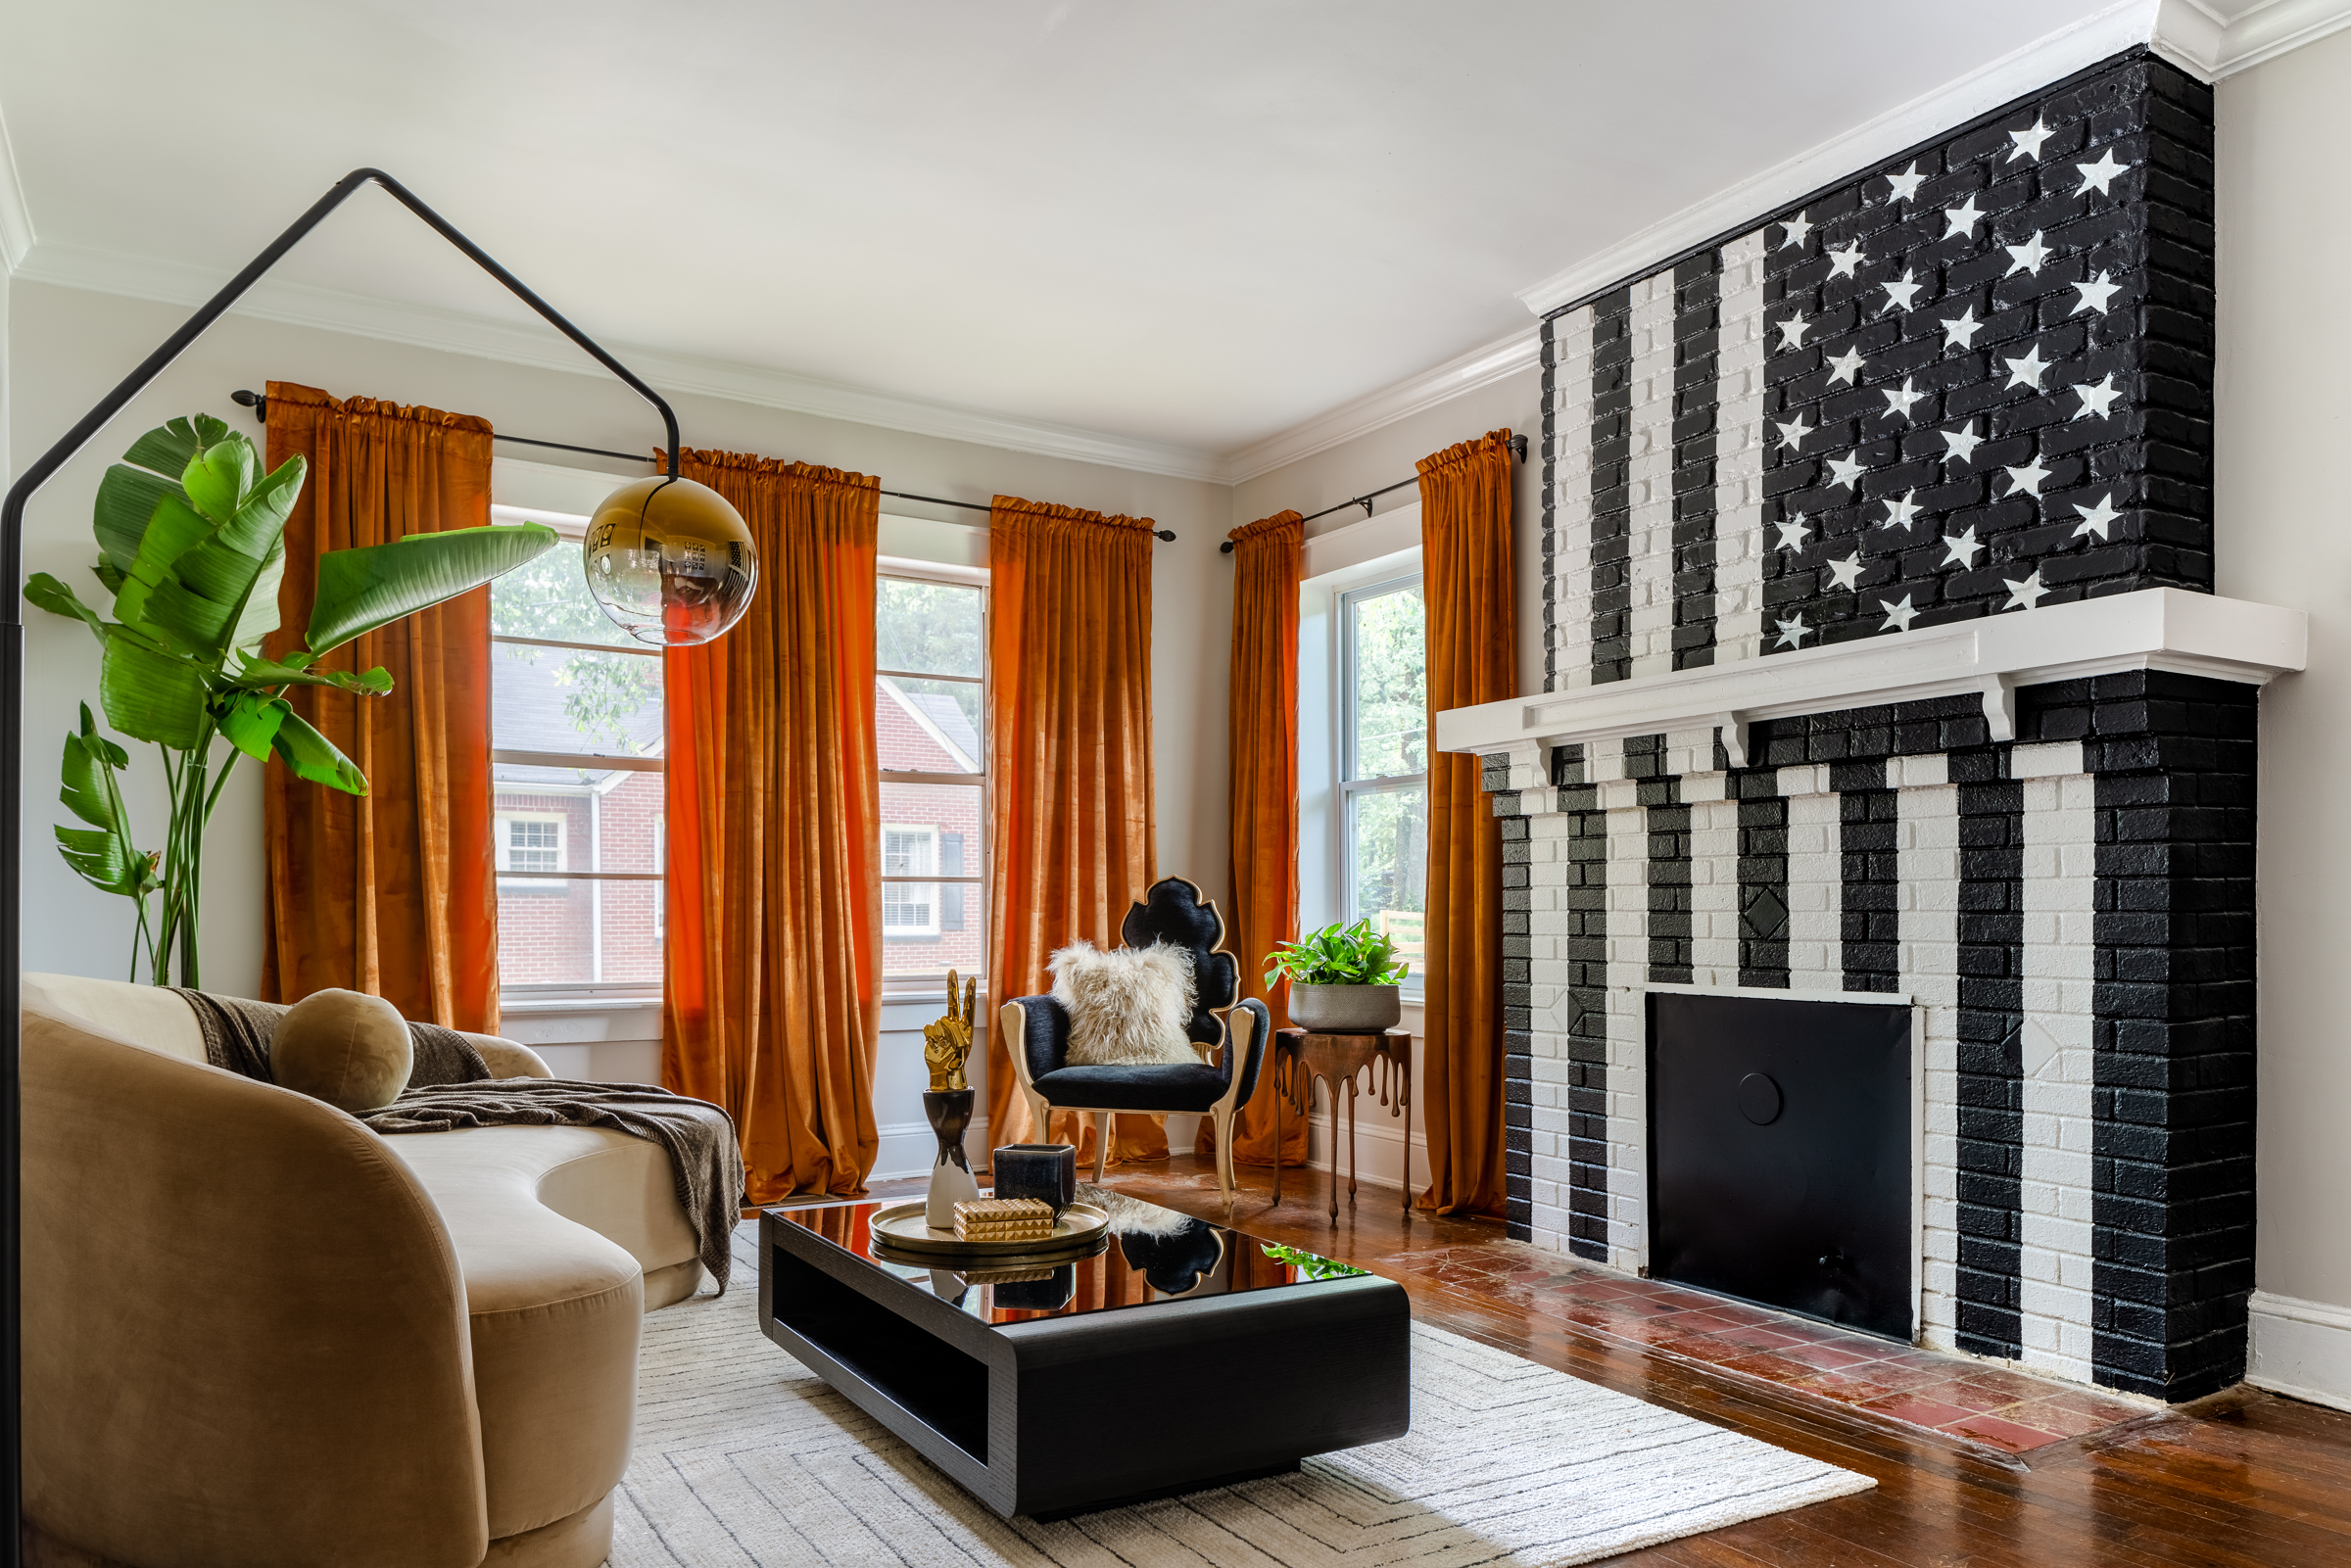 Living room with black and white flag fireplace design, brown chairs in foreground and orange drapes